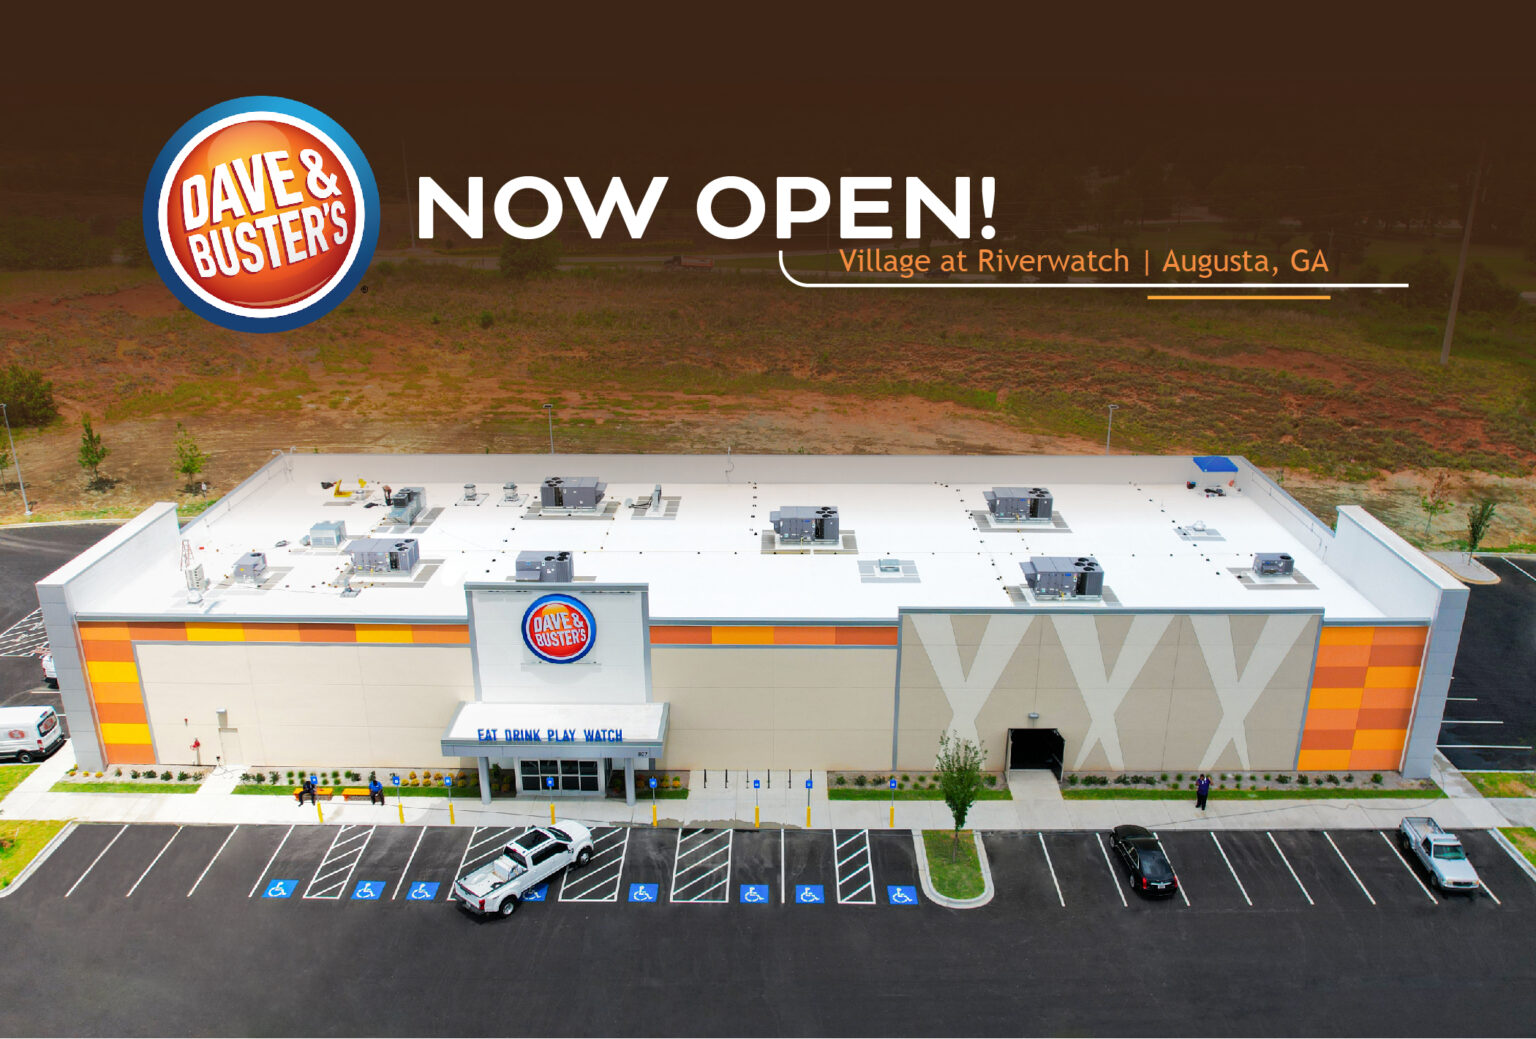 2022_June_Dave&Busters_NowOpen